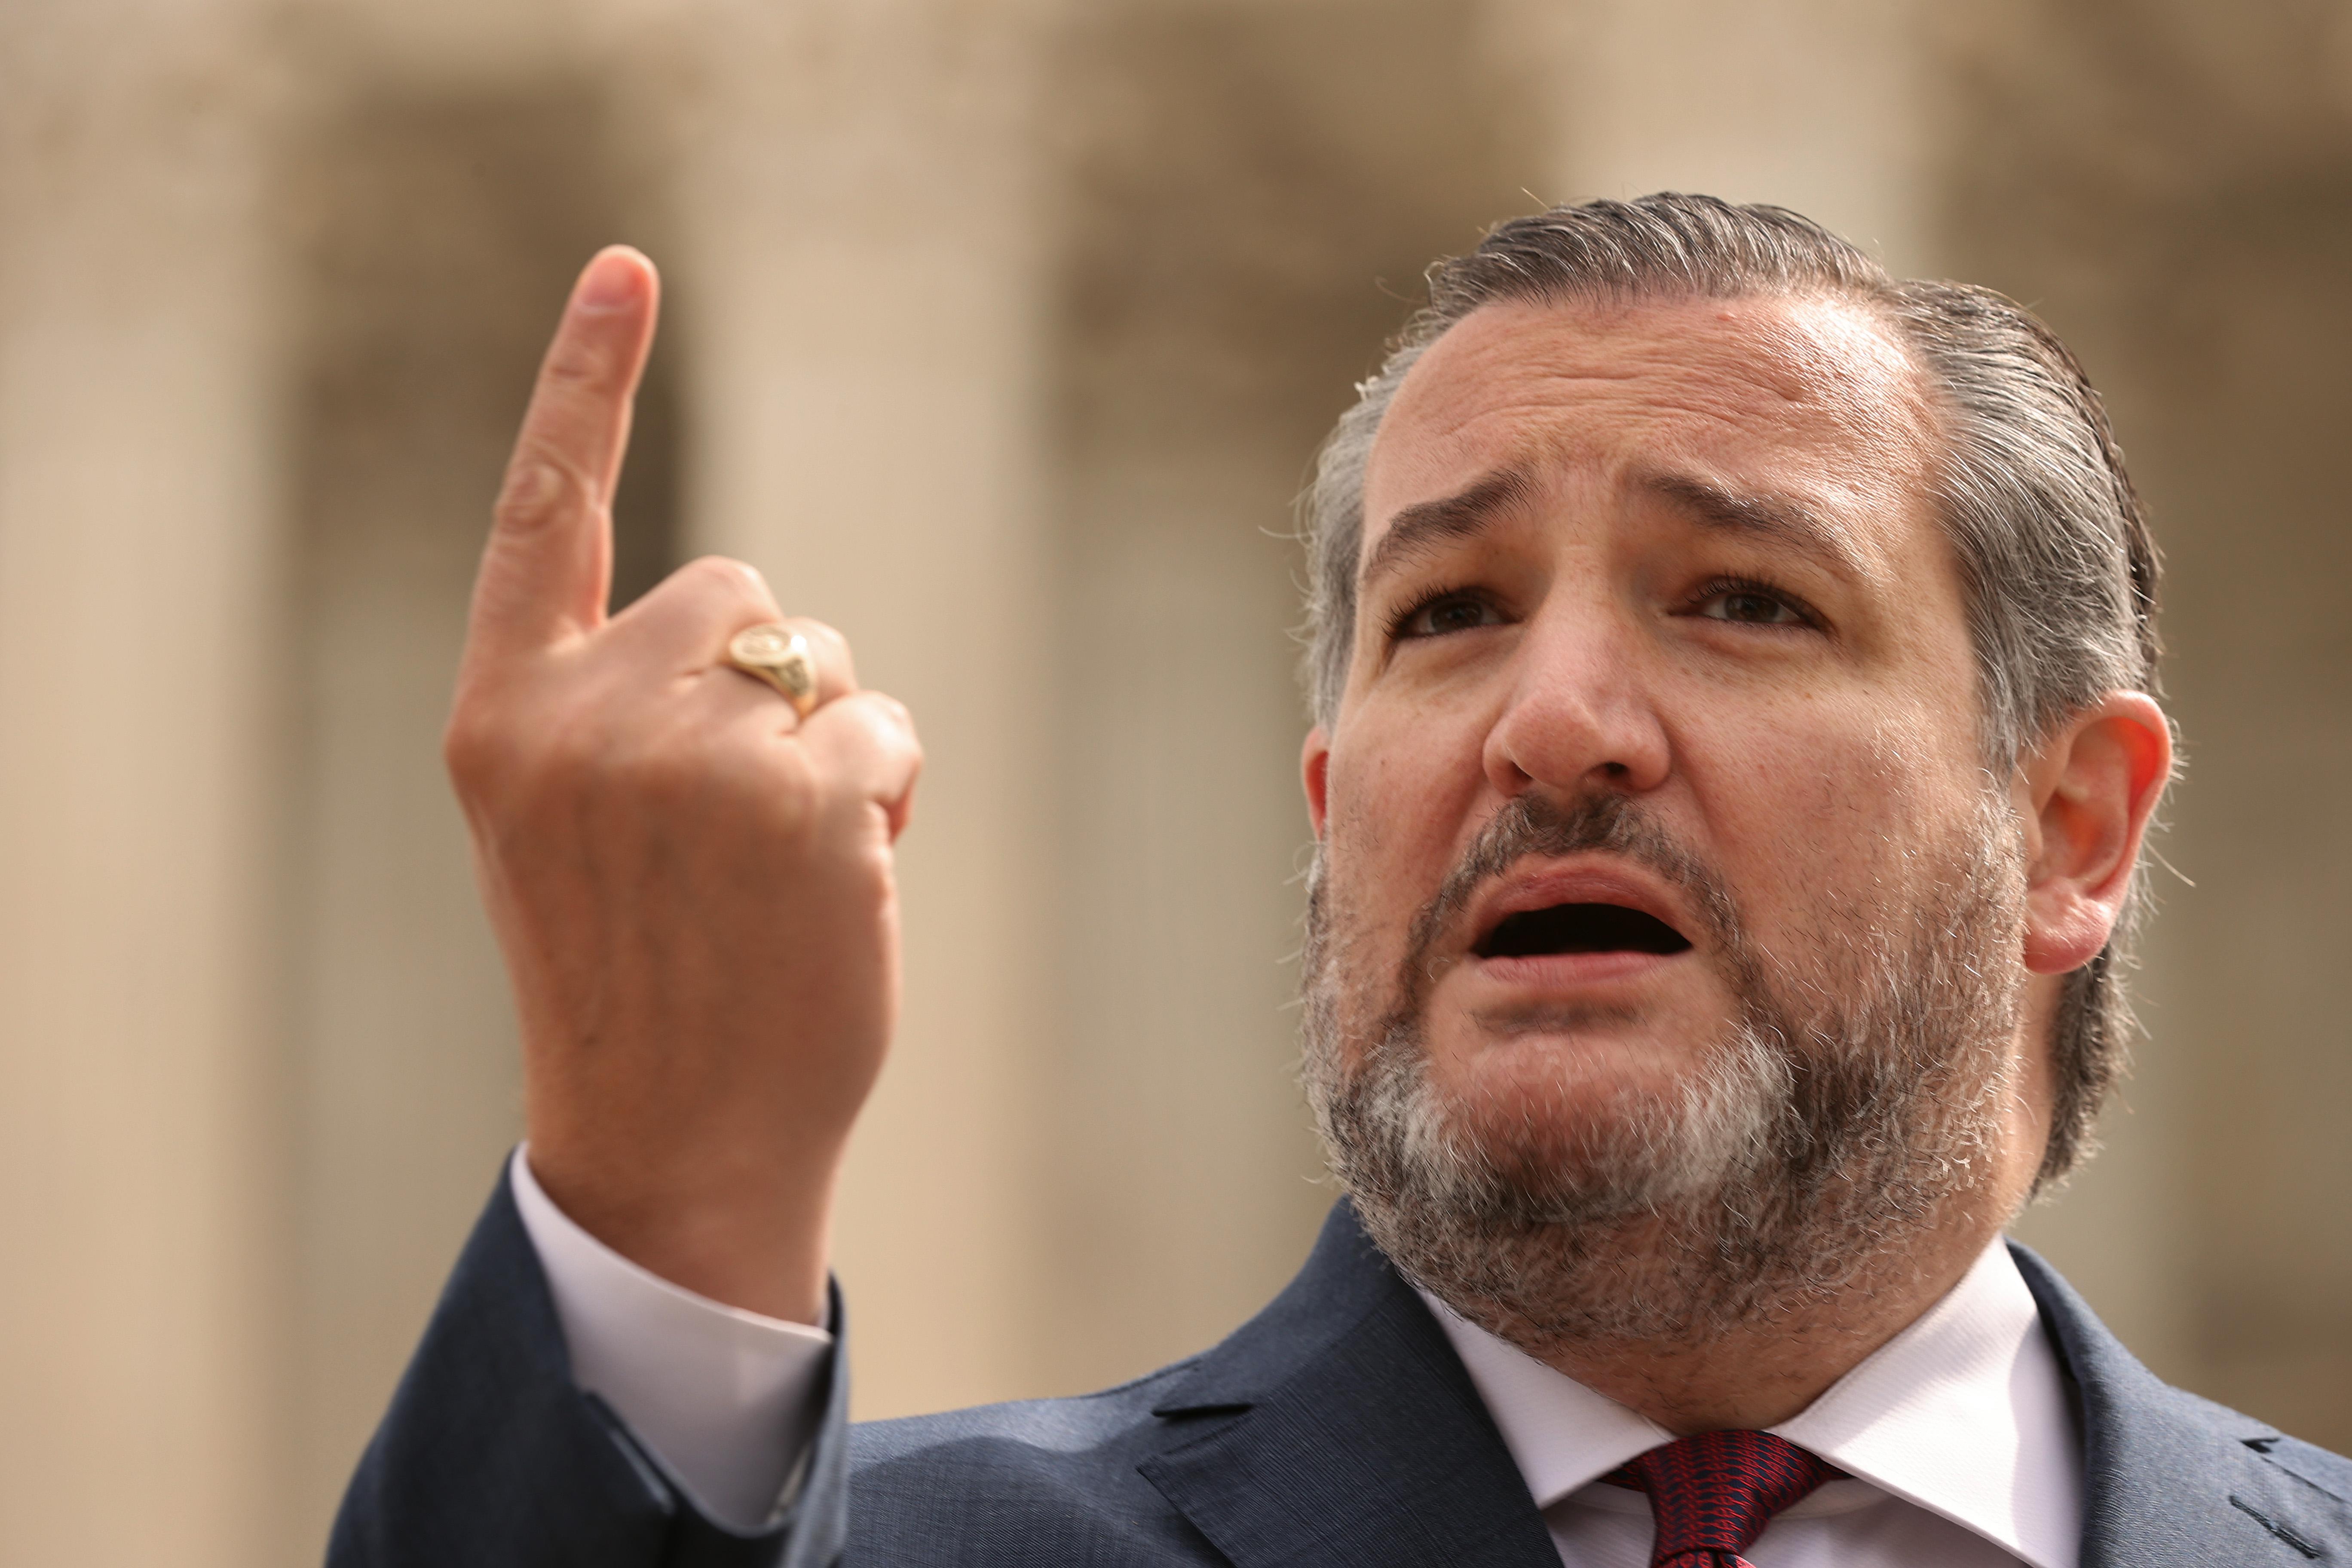 Ted Cruz points his finger in the air and looks distraught.